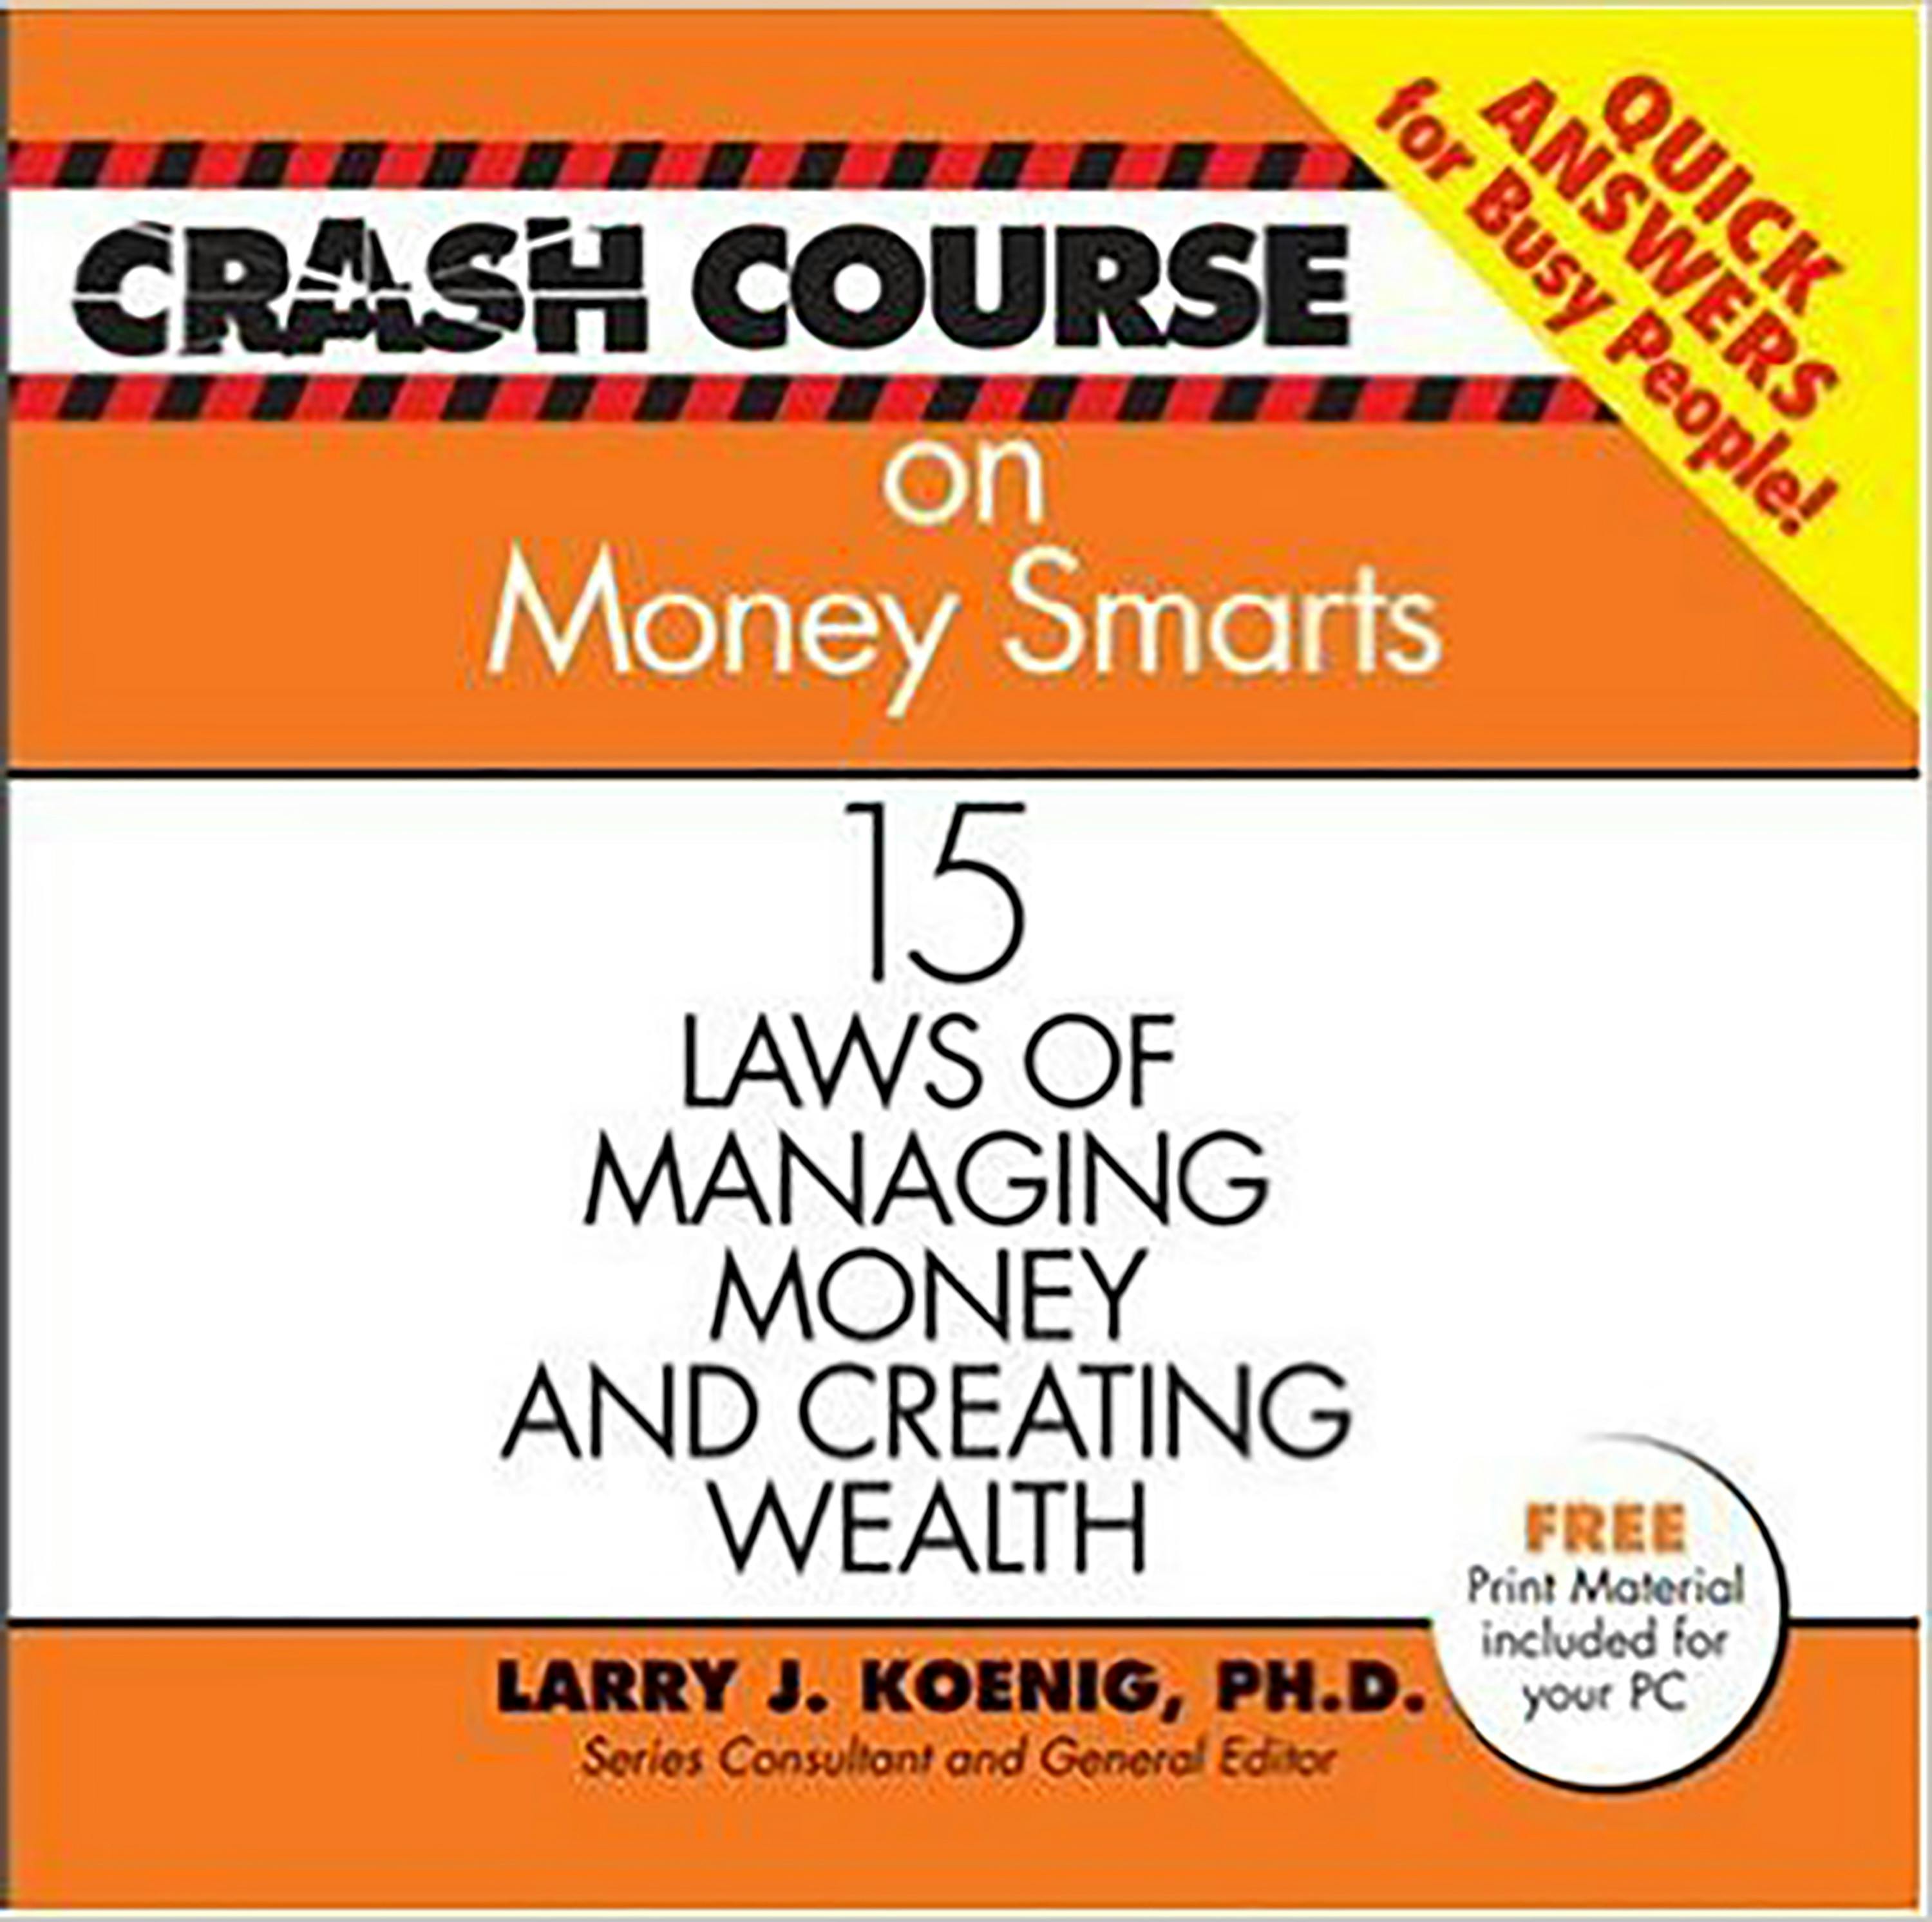 Crash Course on Money Smarts: 15 Laws of Managing Money and Creating Wealth - Larry J. Koenig